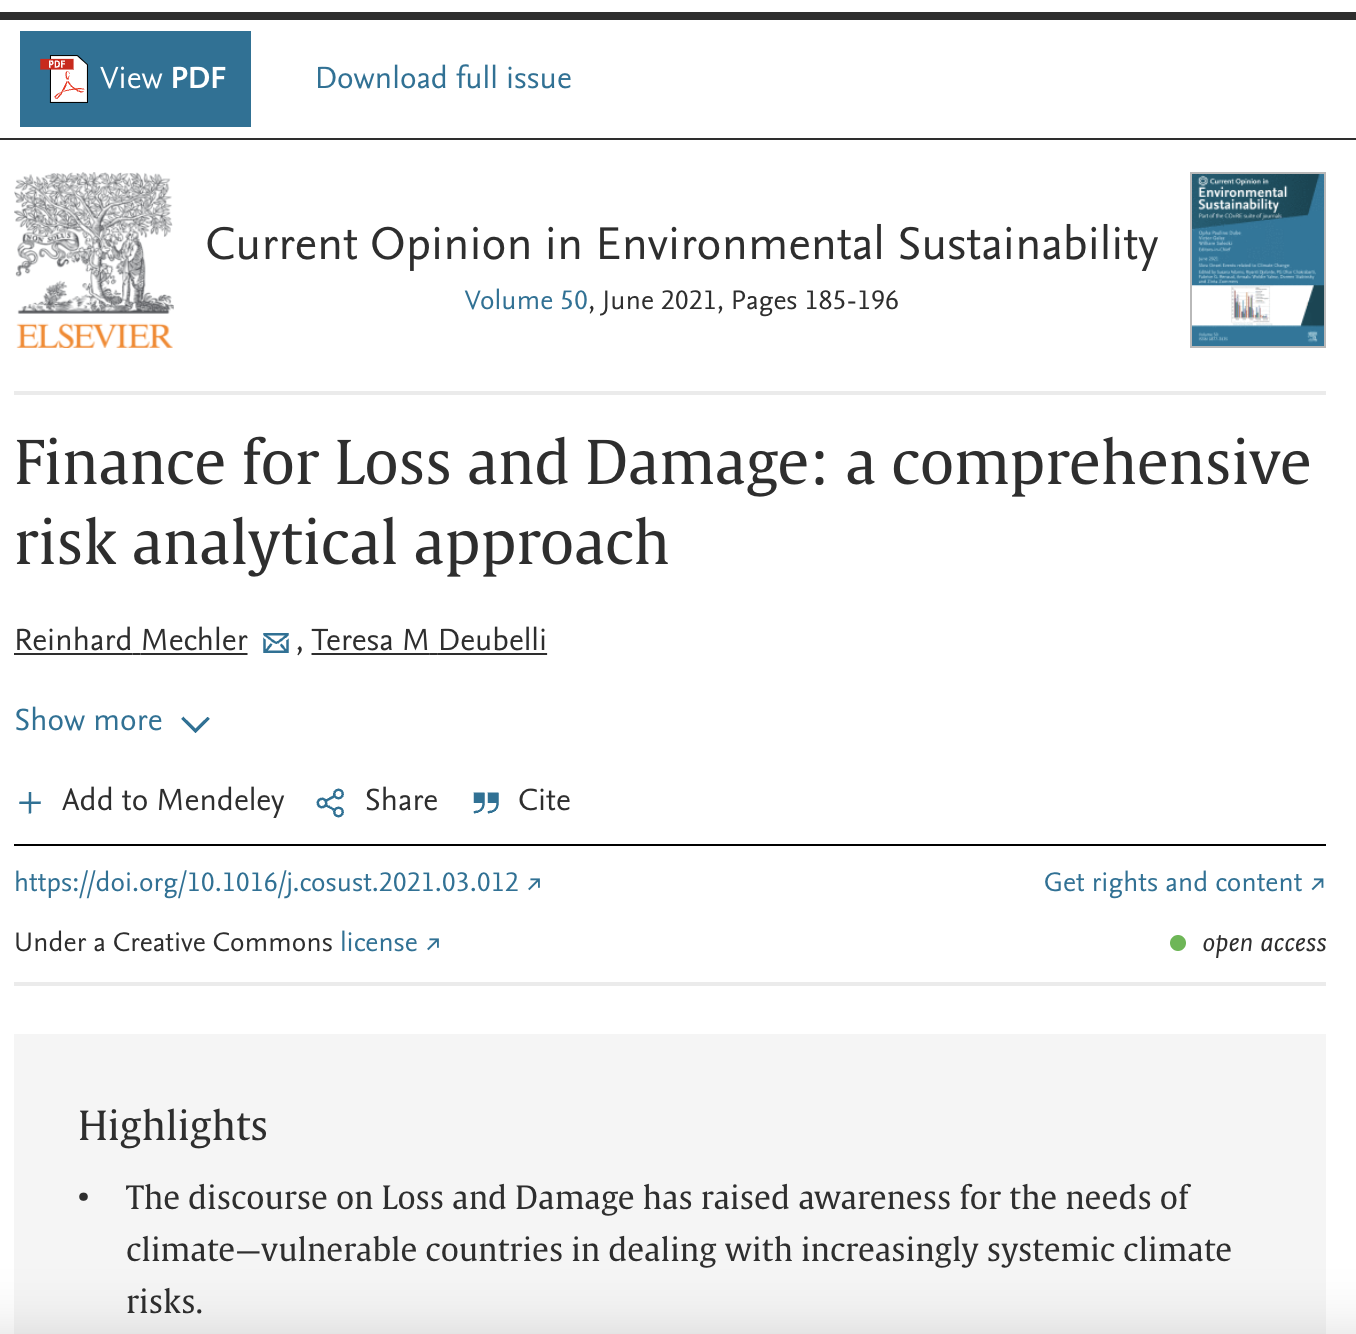 WP5 International cooperation, development and resilience- Finance for Loss and Damage: a comprehensive risk analytical approach Author links open overlay panel